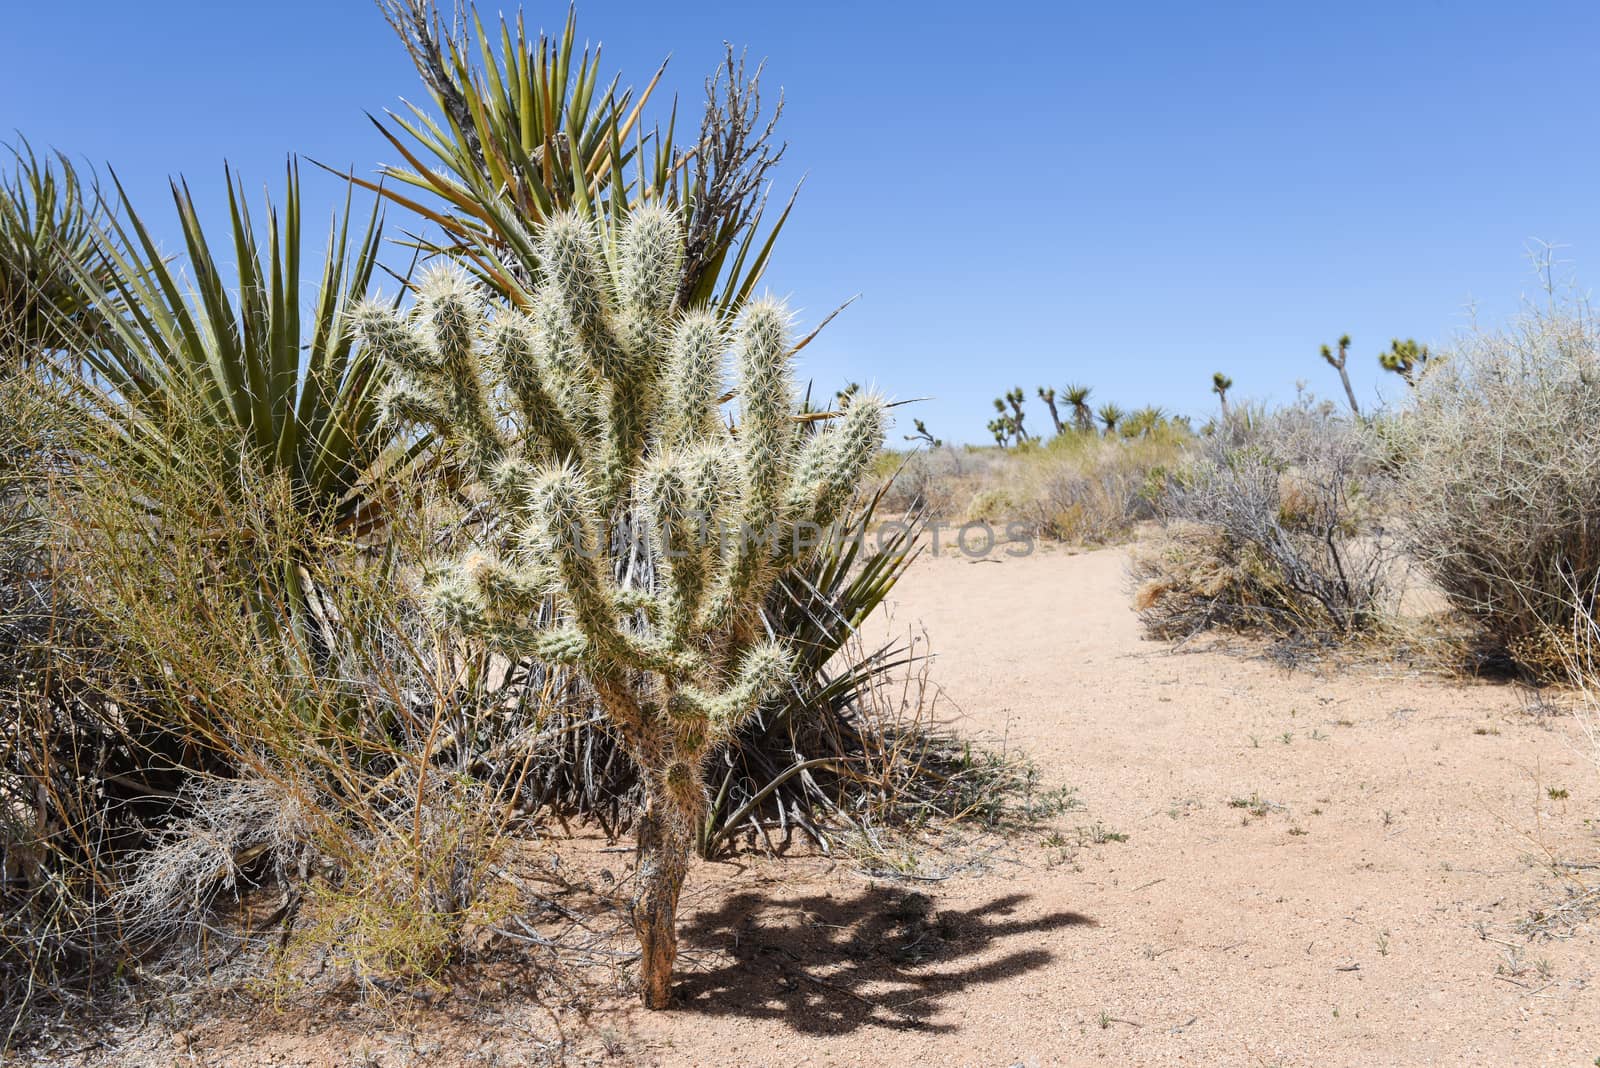 Cactus along Boy Scout Trail in Joshua Tree National Park, Calif by Njean